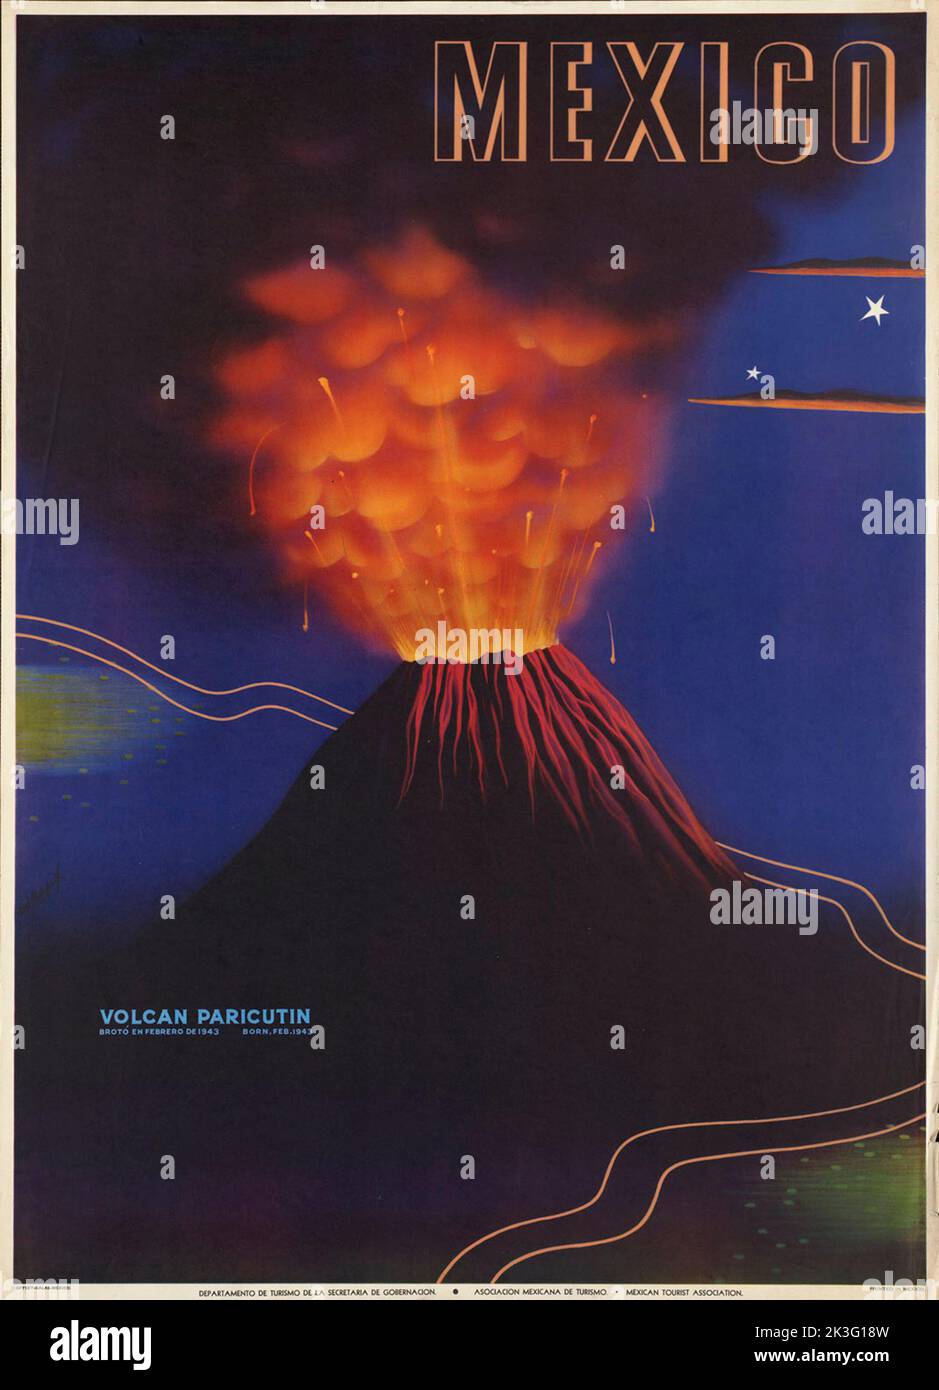 Vintage travel poster showing the 1943 eruption of Paricutin Volcano in the Mexican state of Michoacan, Mexico Stock Photo